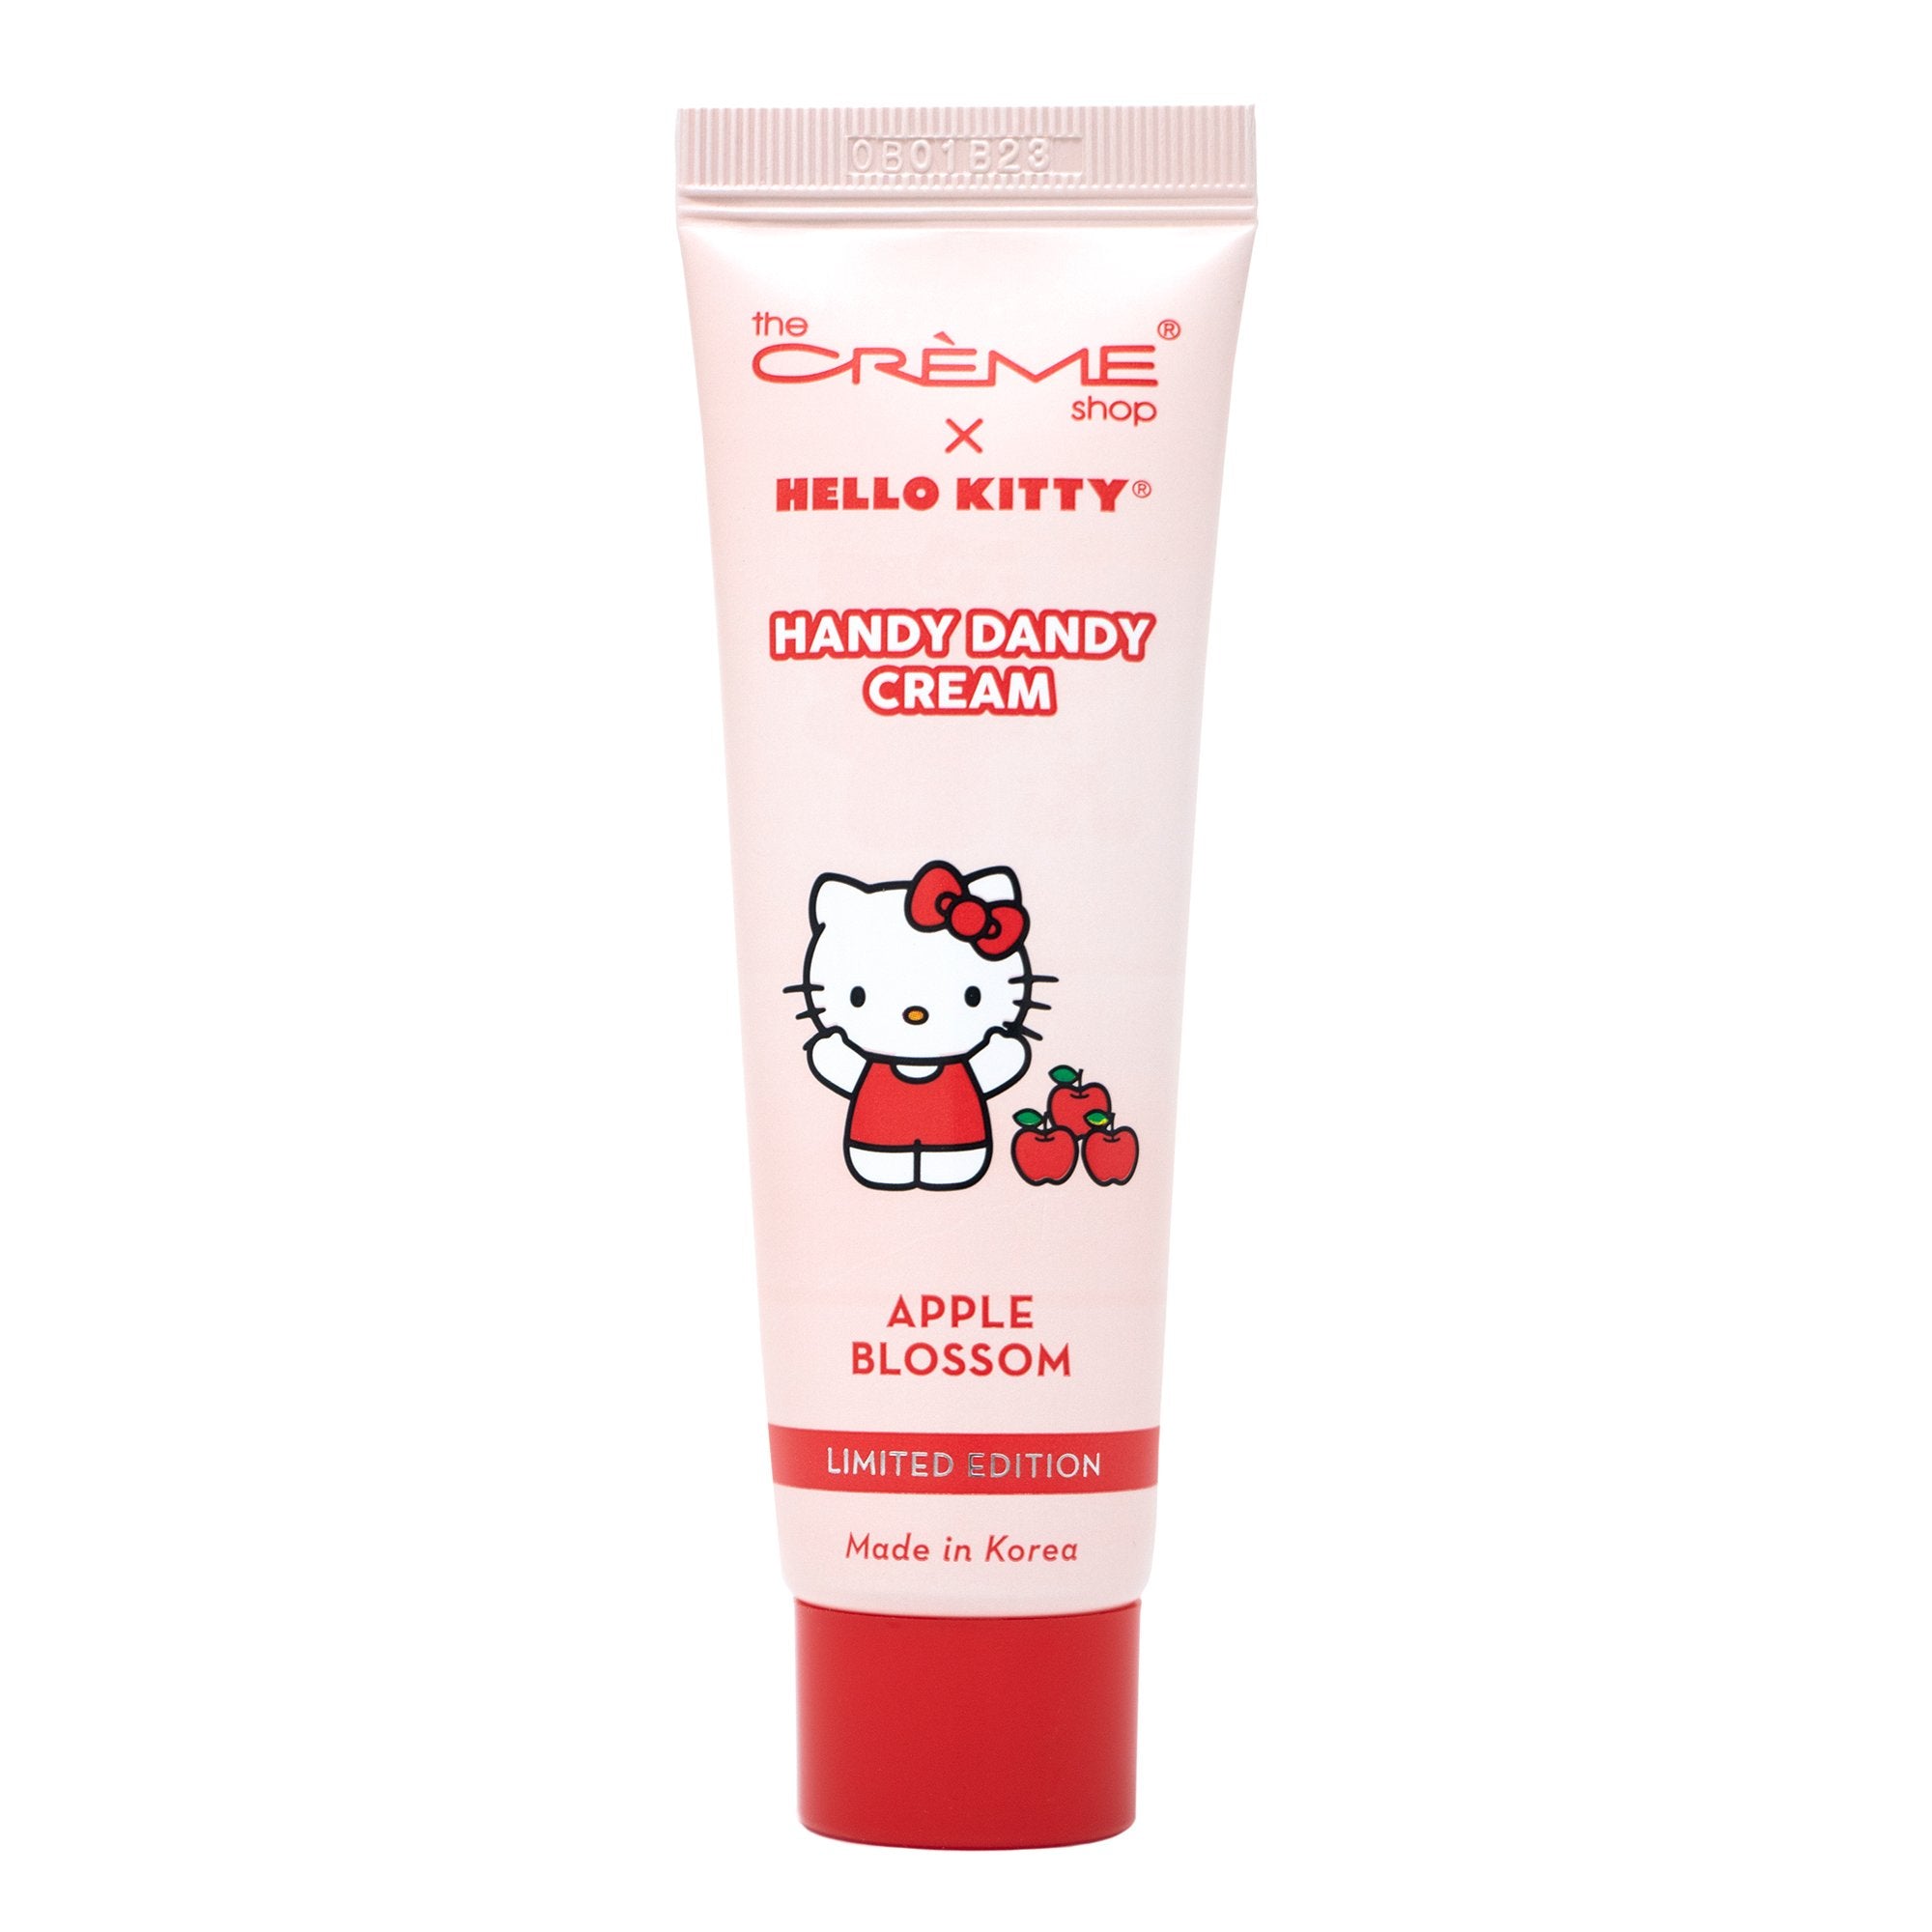 The Crème Shop x Hello Kitty Handy Dandy Cream (Limited Edition) | Apple Blossom (Travel-Sized) - The Crème Shop